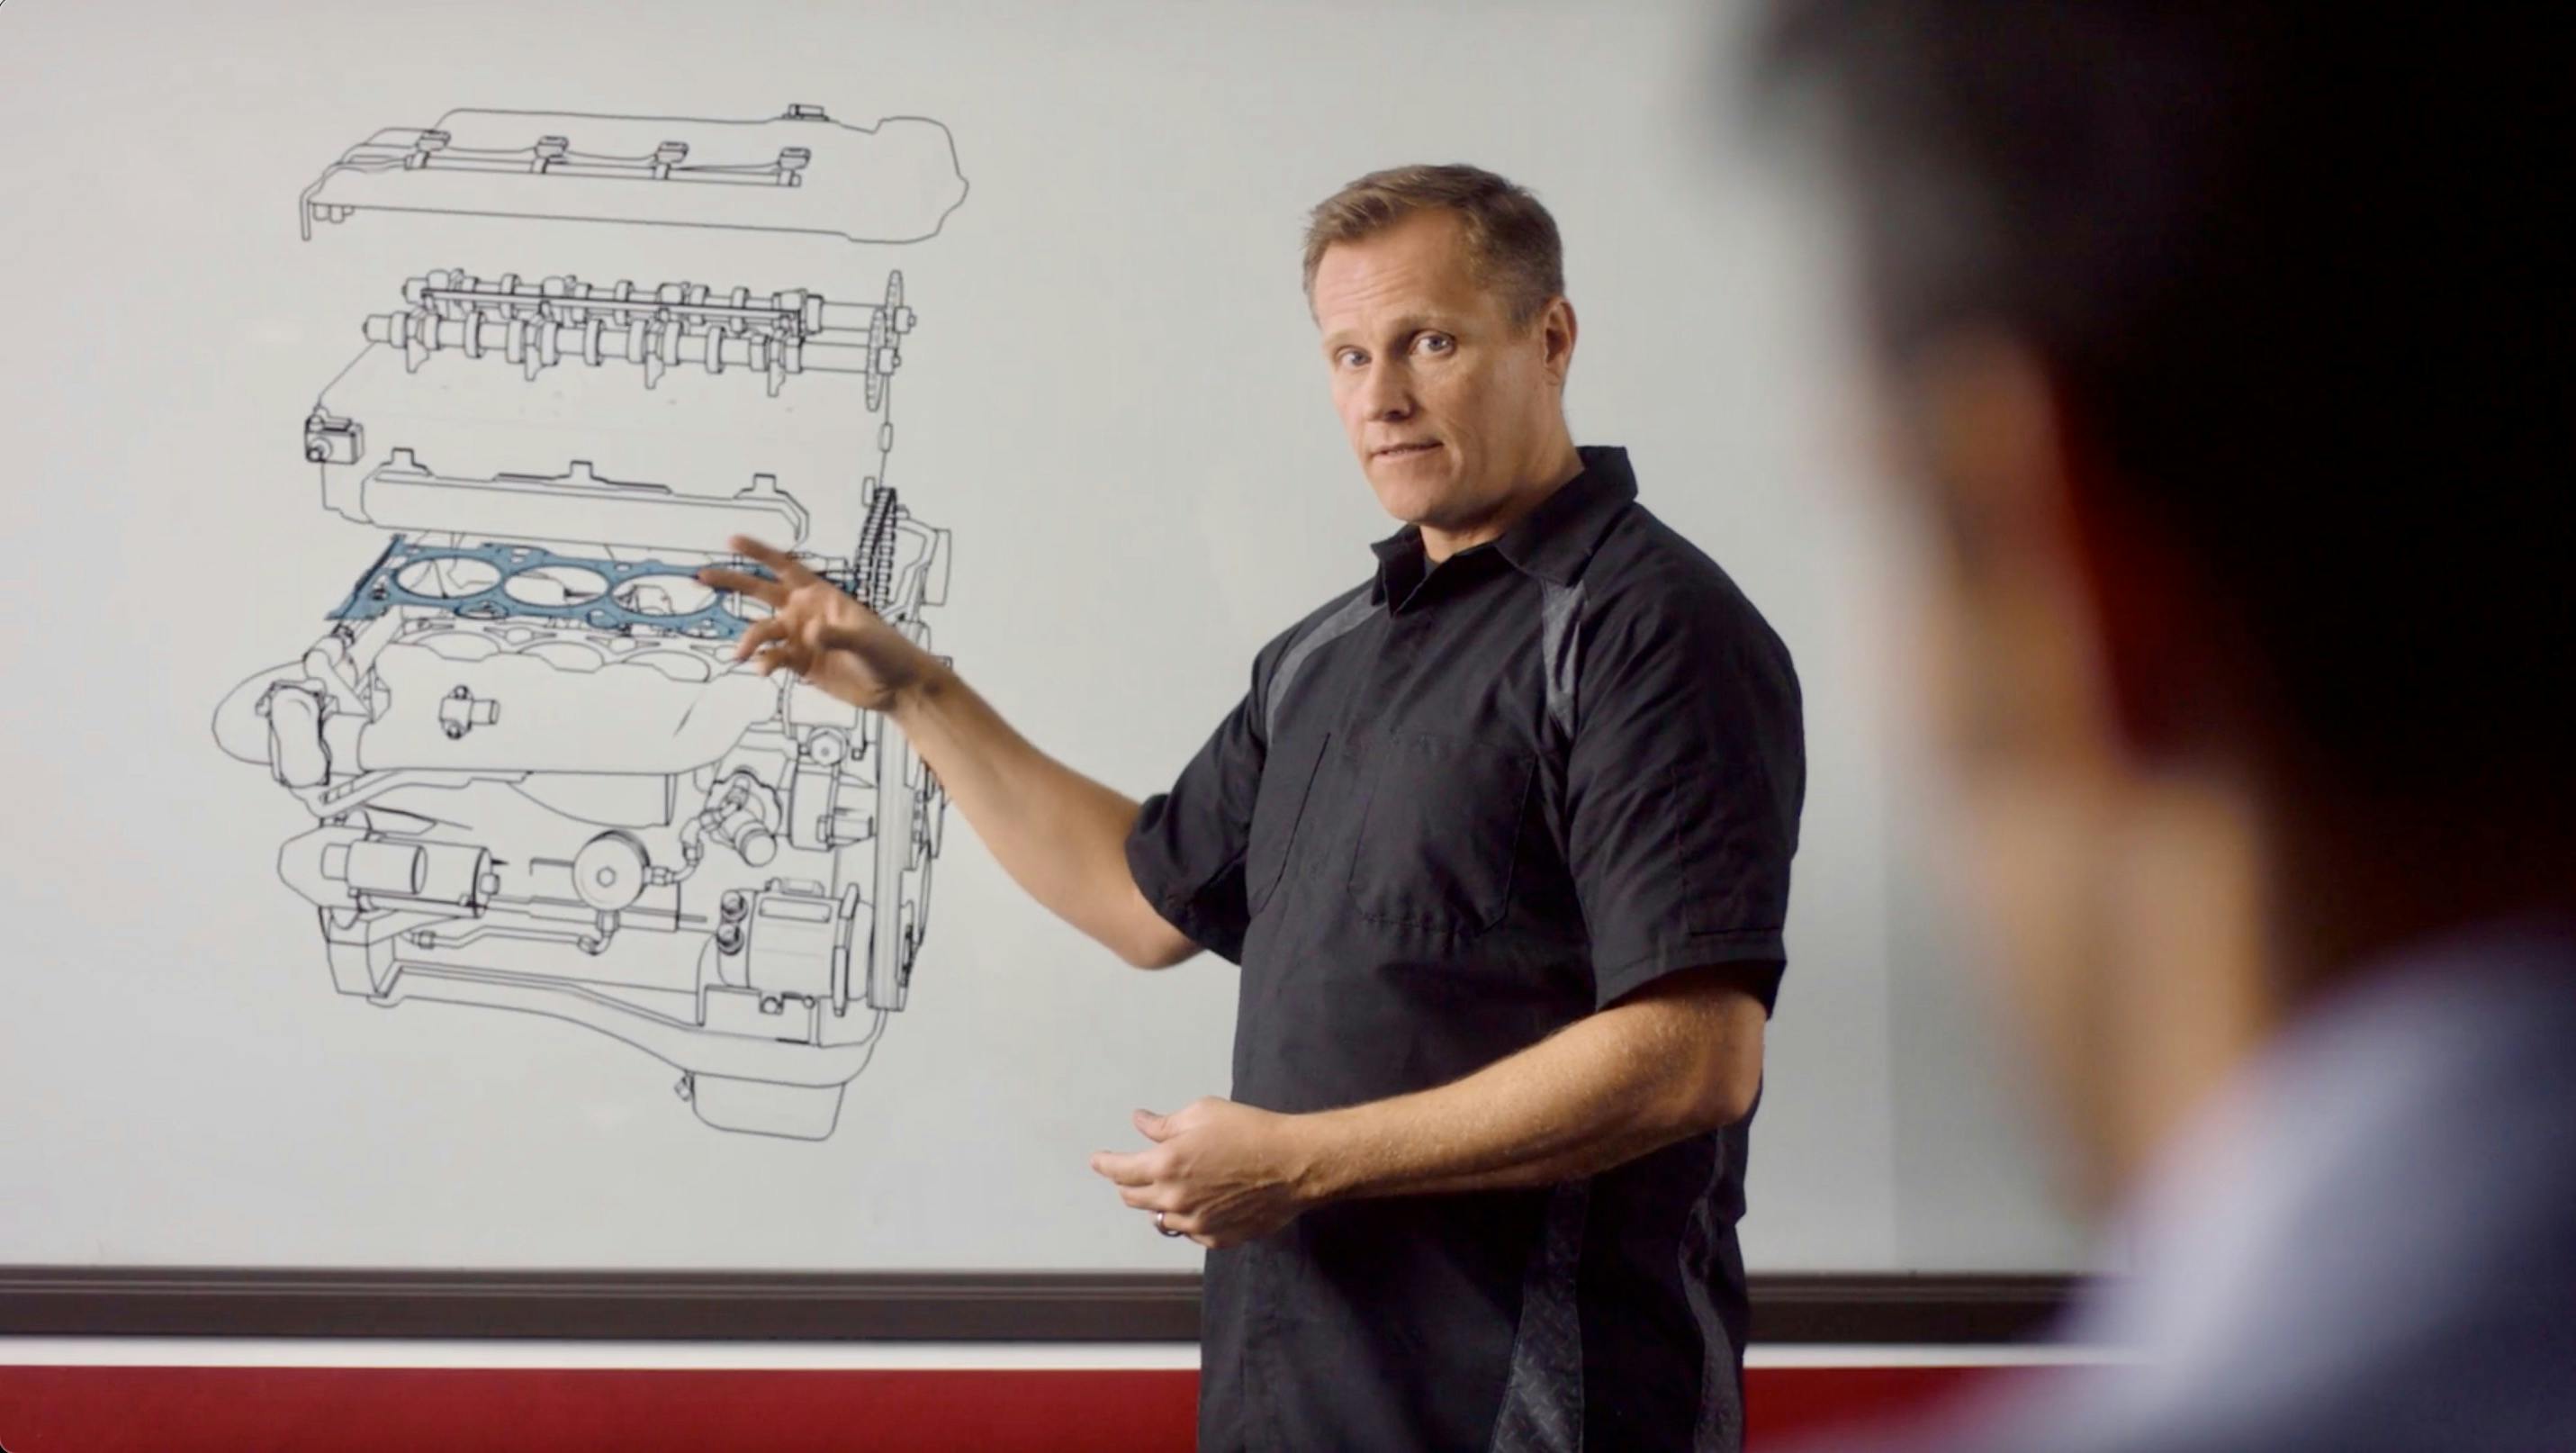 Screenshot of trainer explaining an engine to student